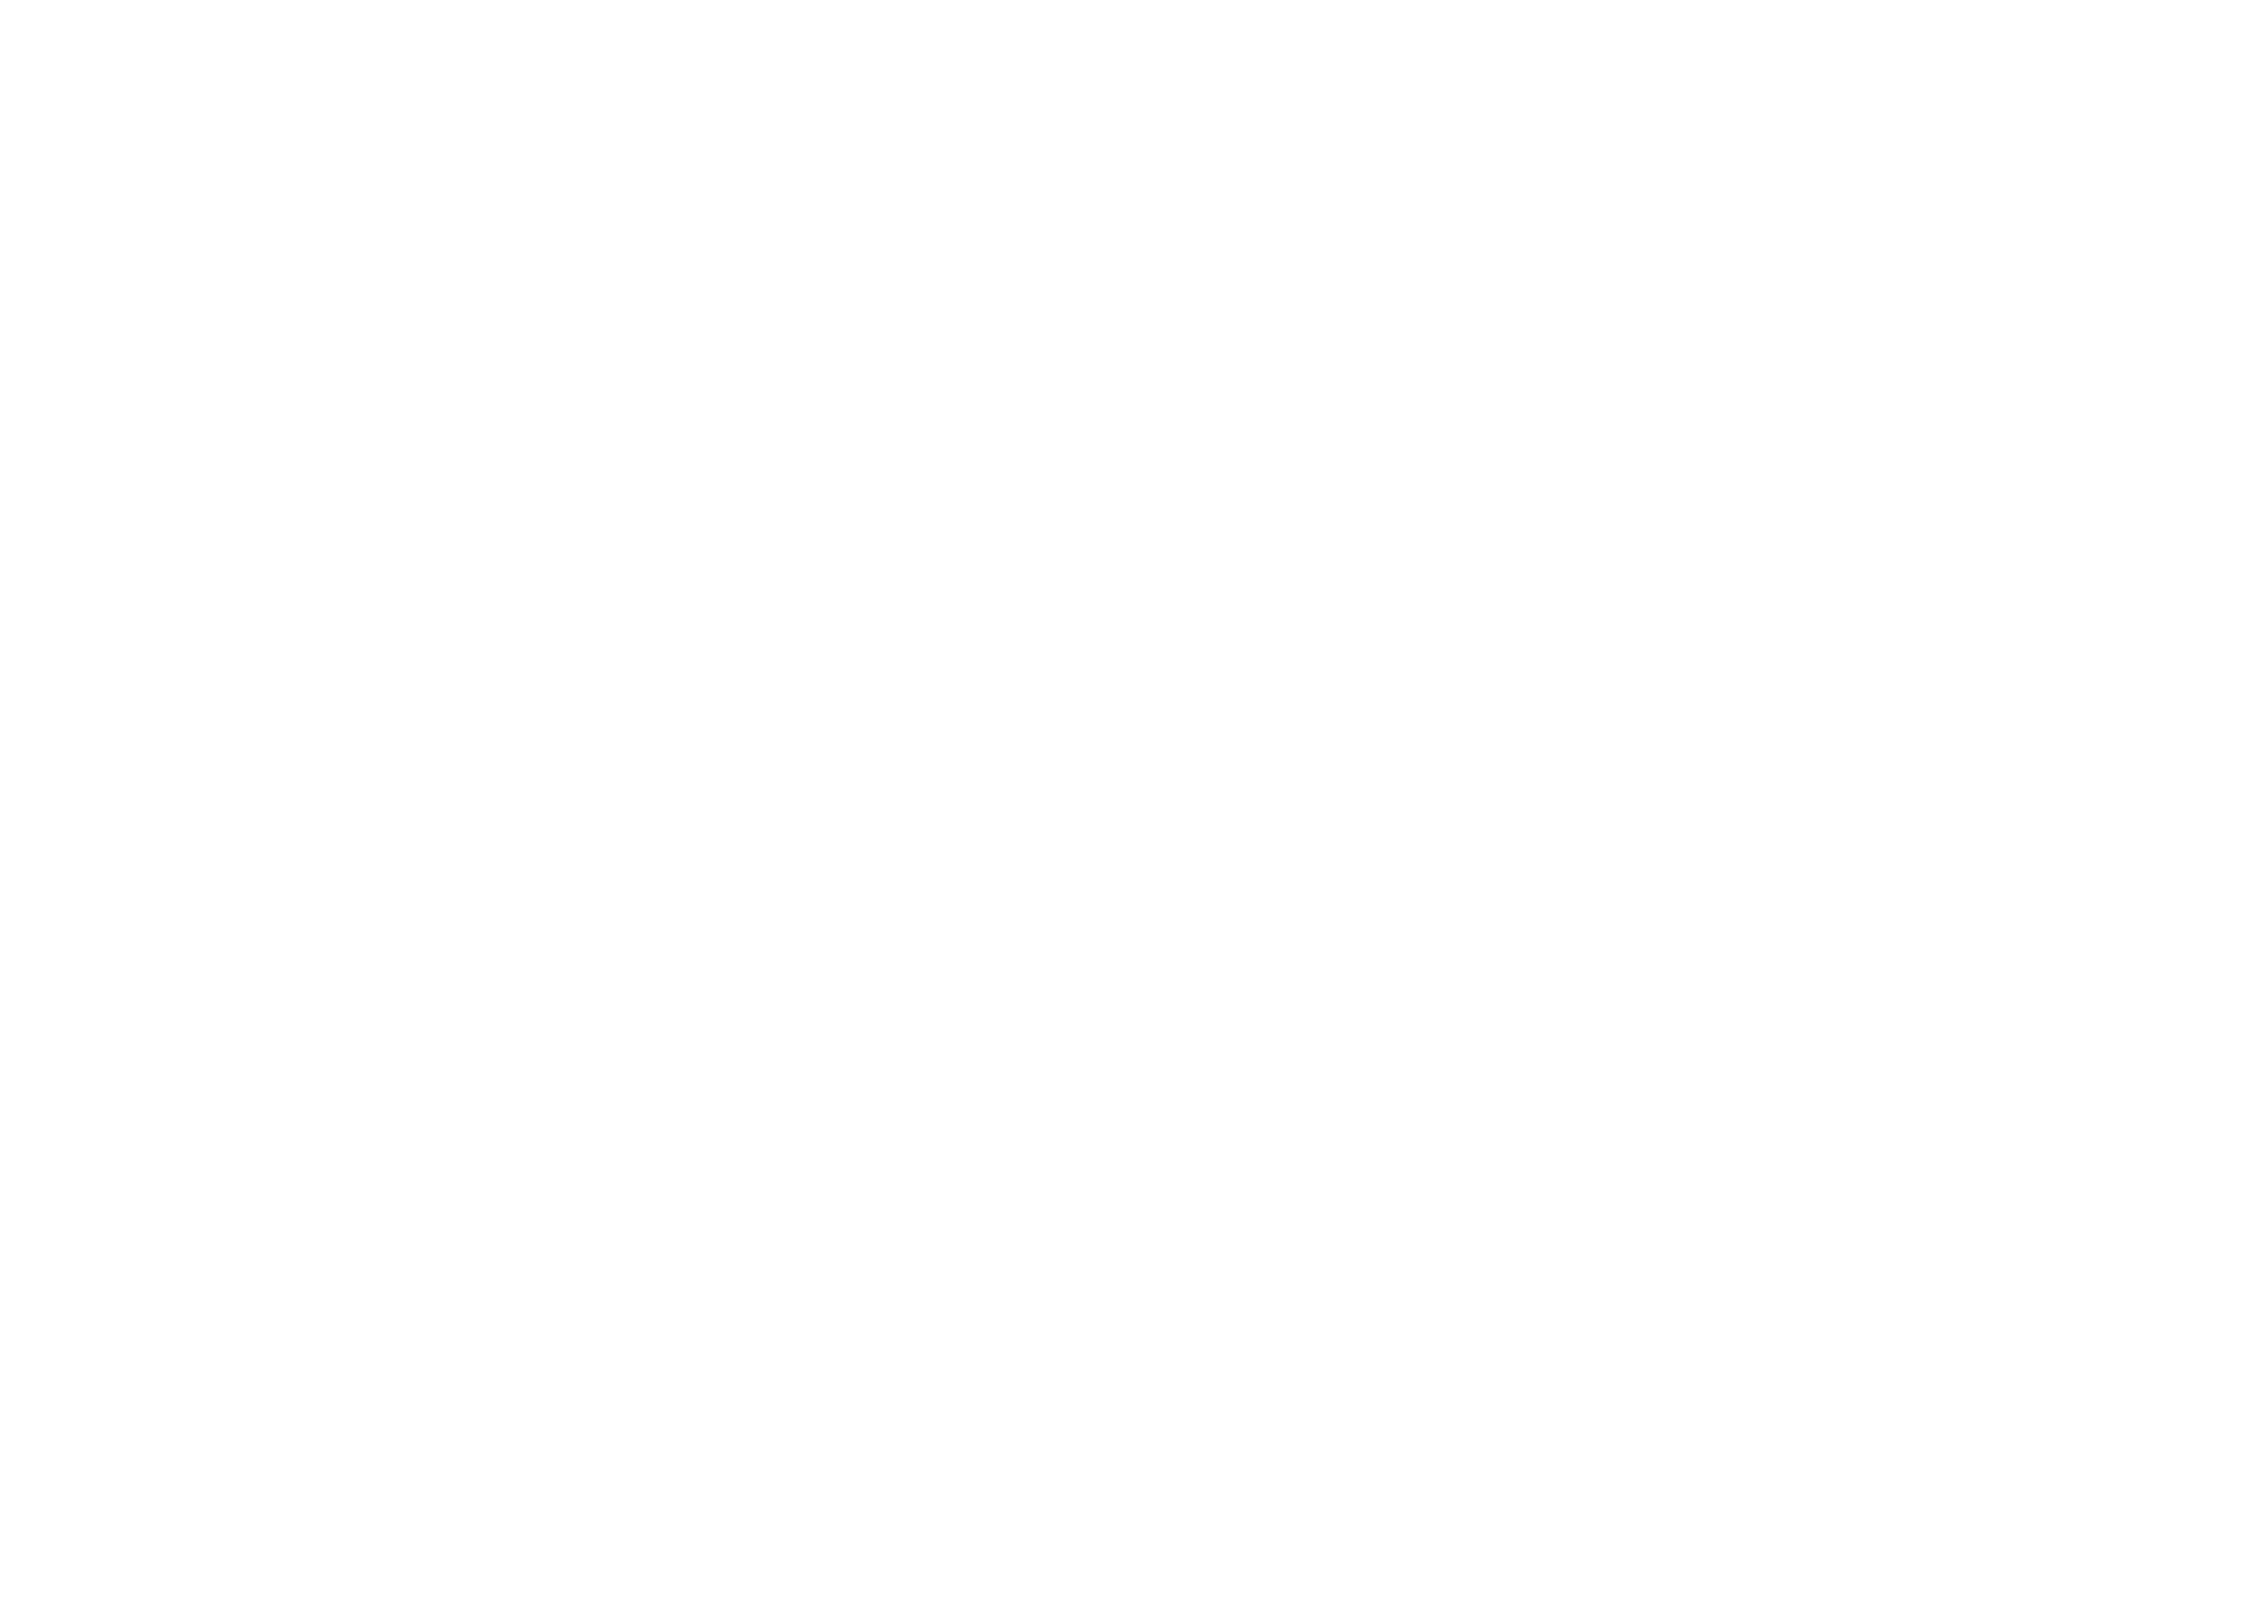 Cband Facts